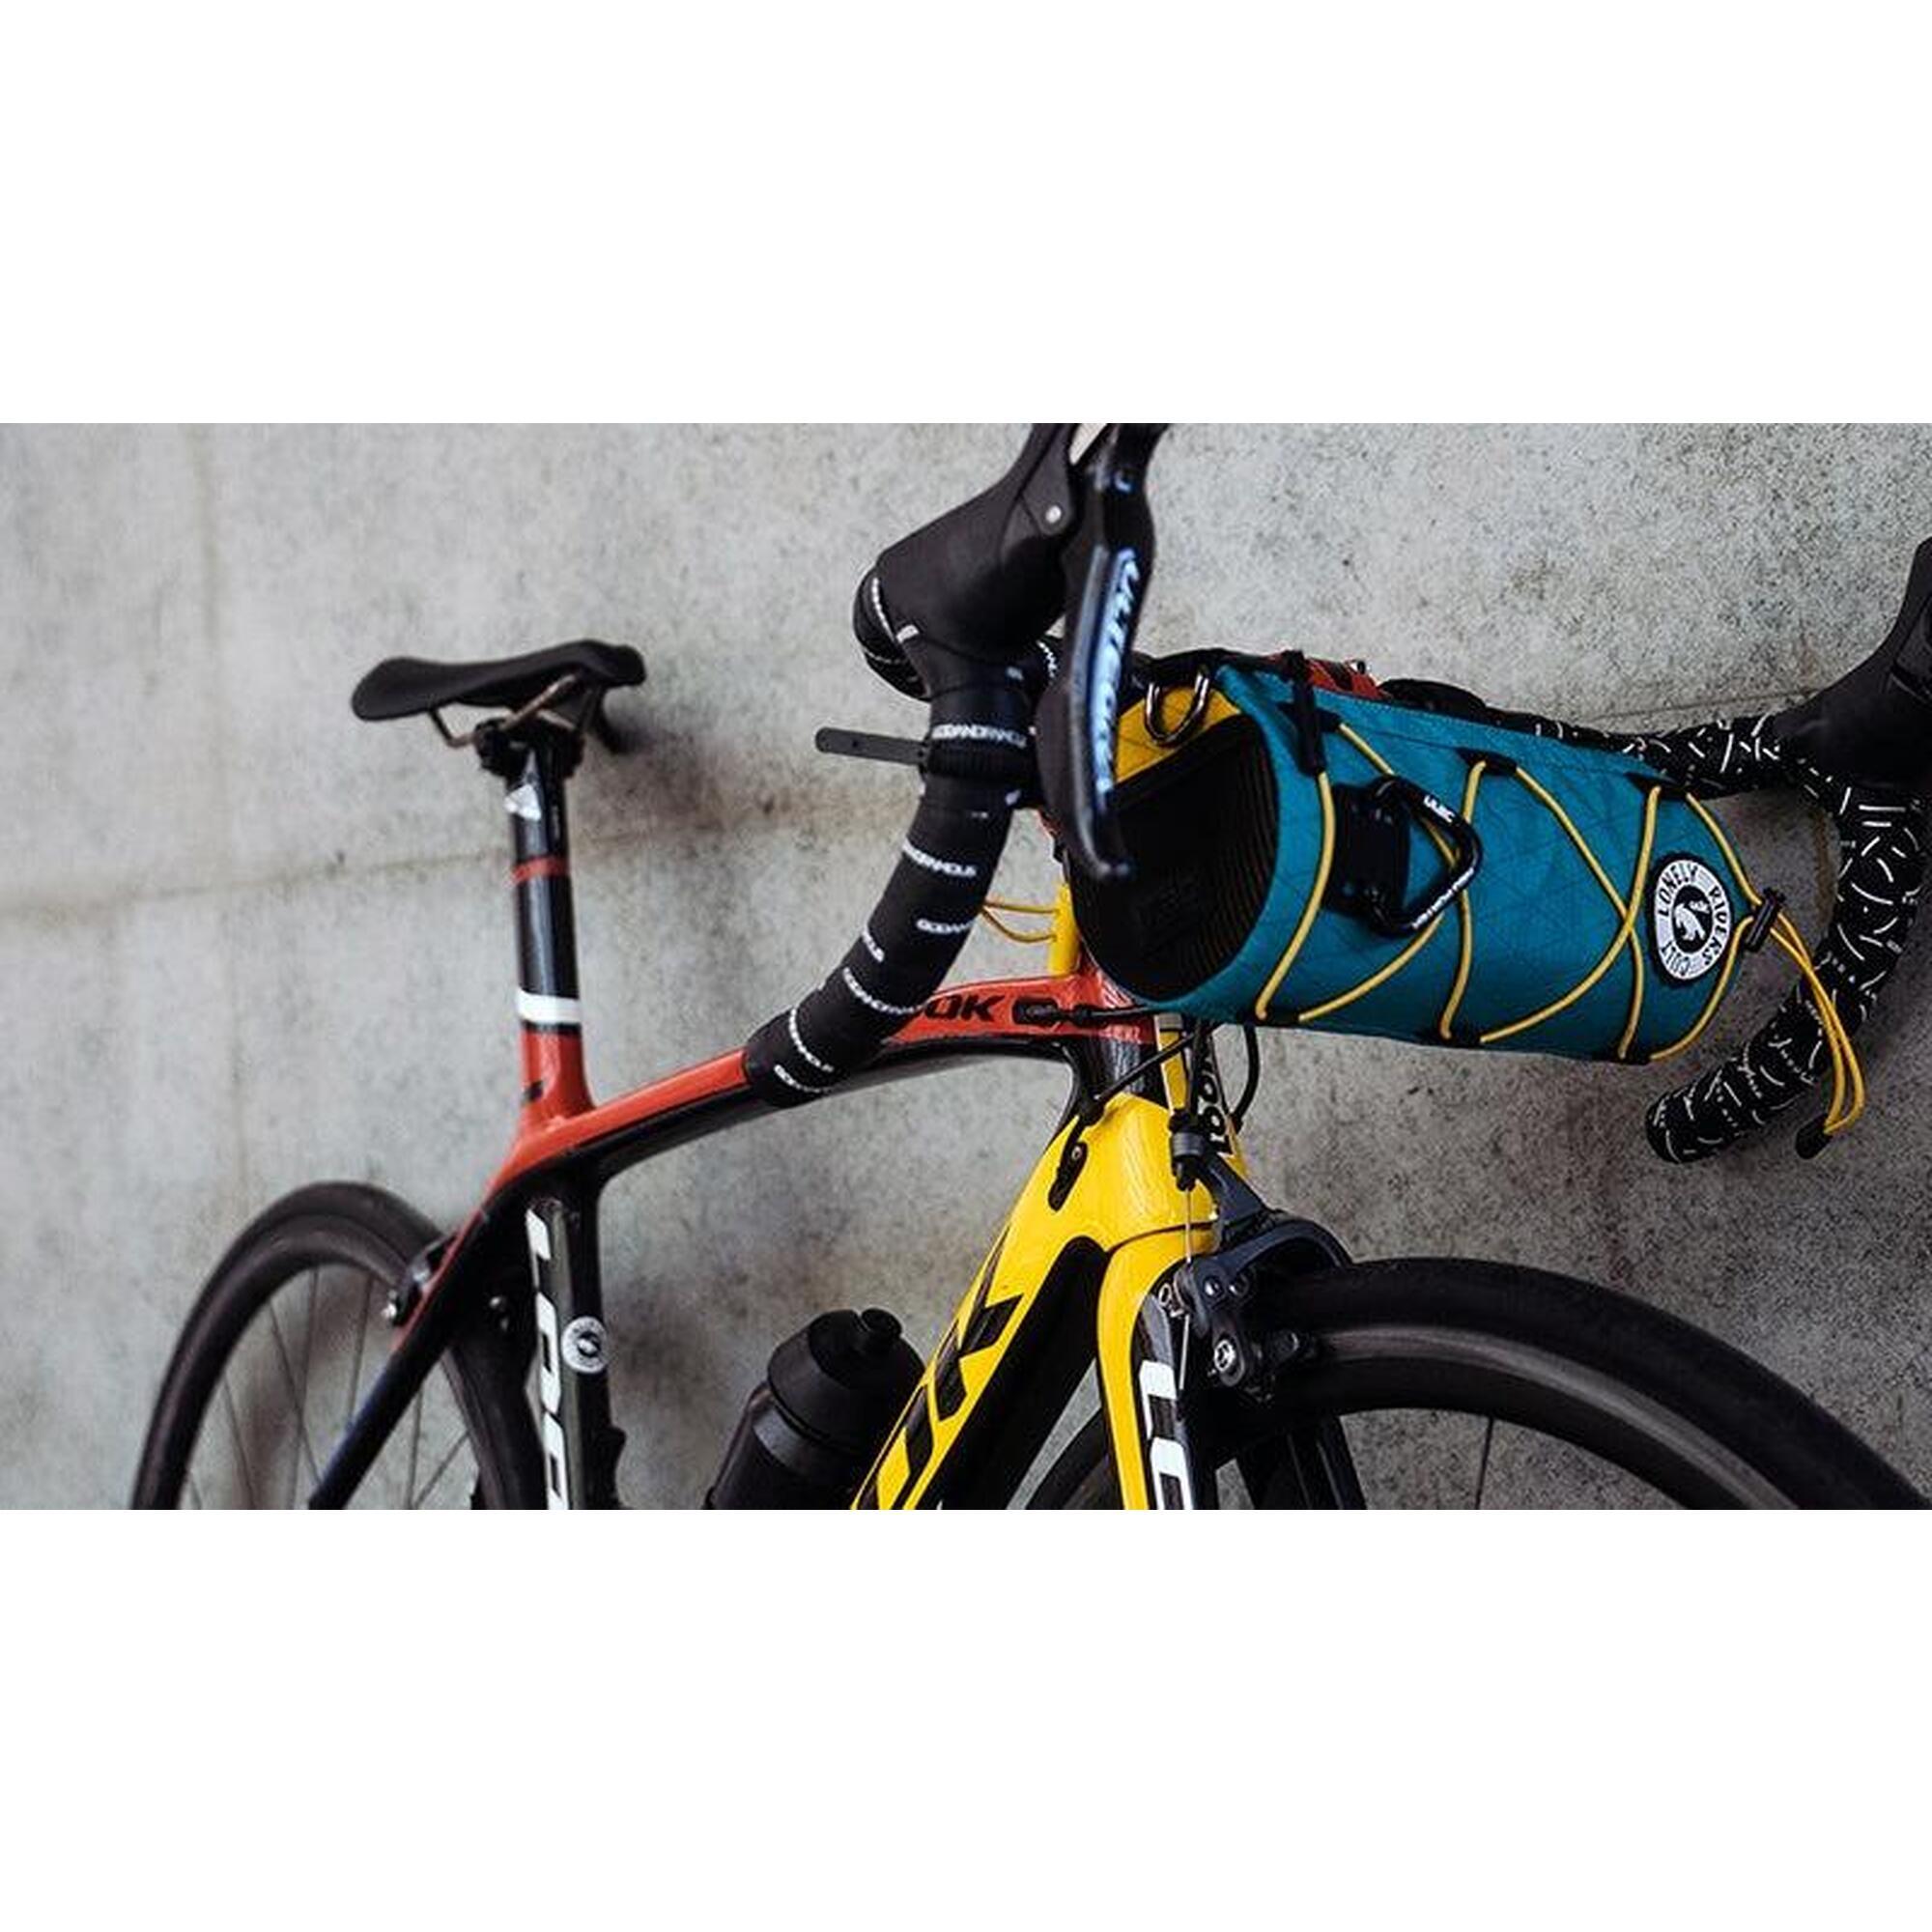 COURSIER GT FRONT CYCLING BAG 1.7L - TEAL